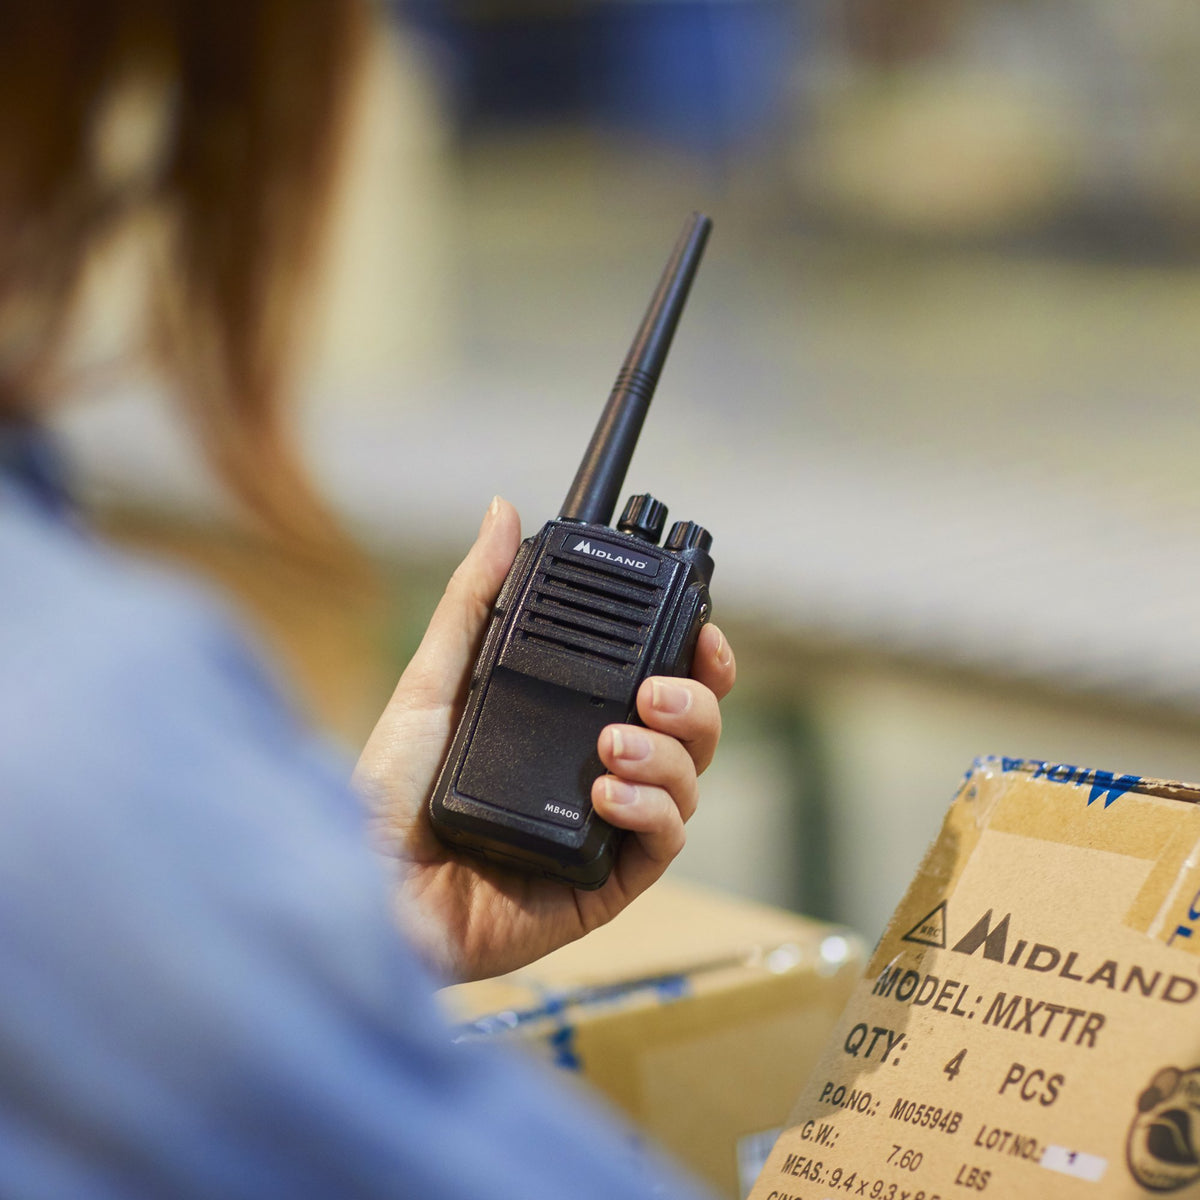 Midland MB400 Business Two-Way Radio Easy to Program Long-Range 16 Channels Coverage for up to a 350,000 Square Foot Warehouse Construction Ho - 3